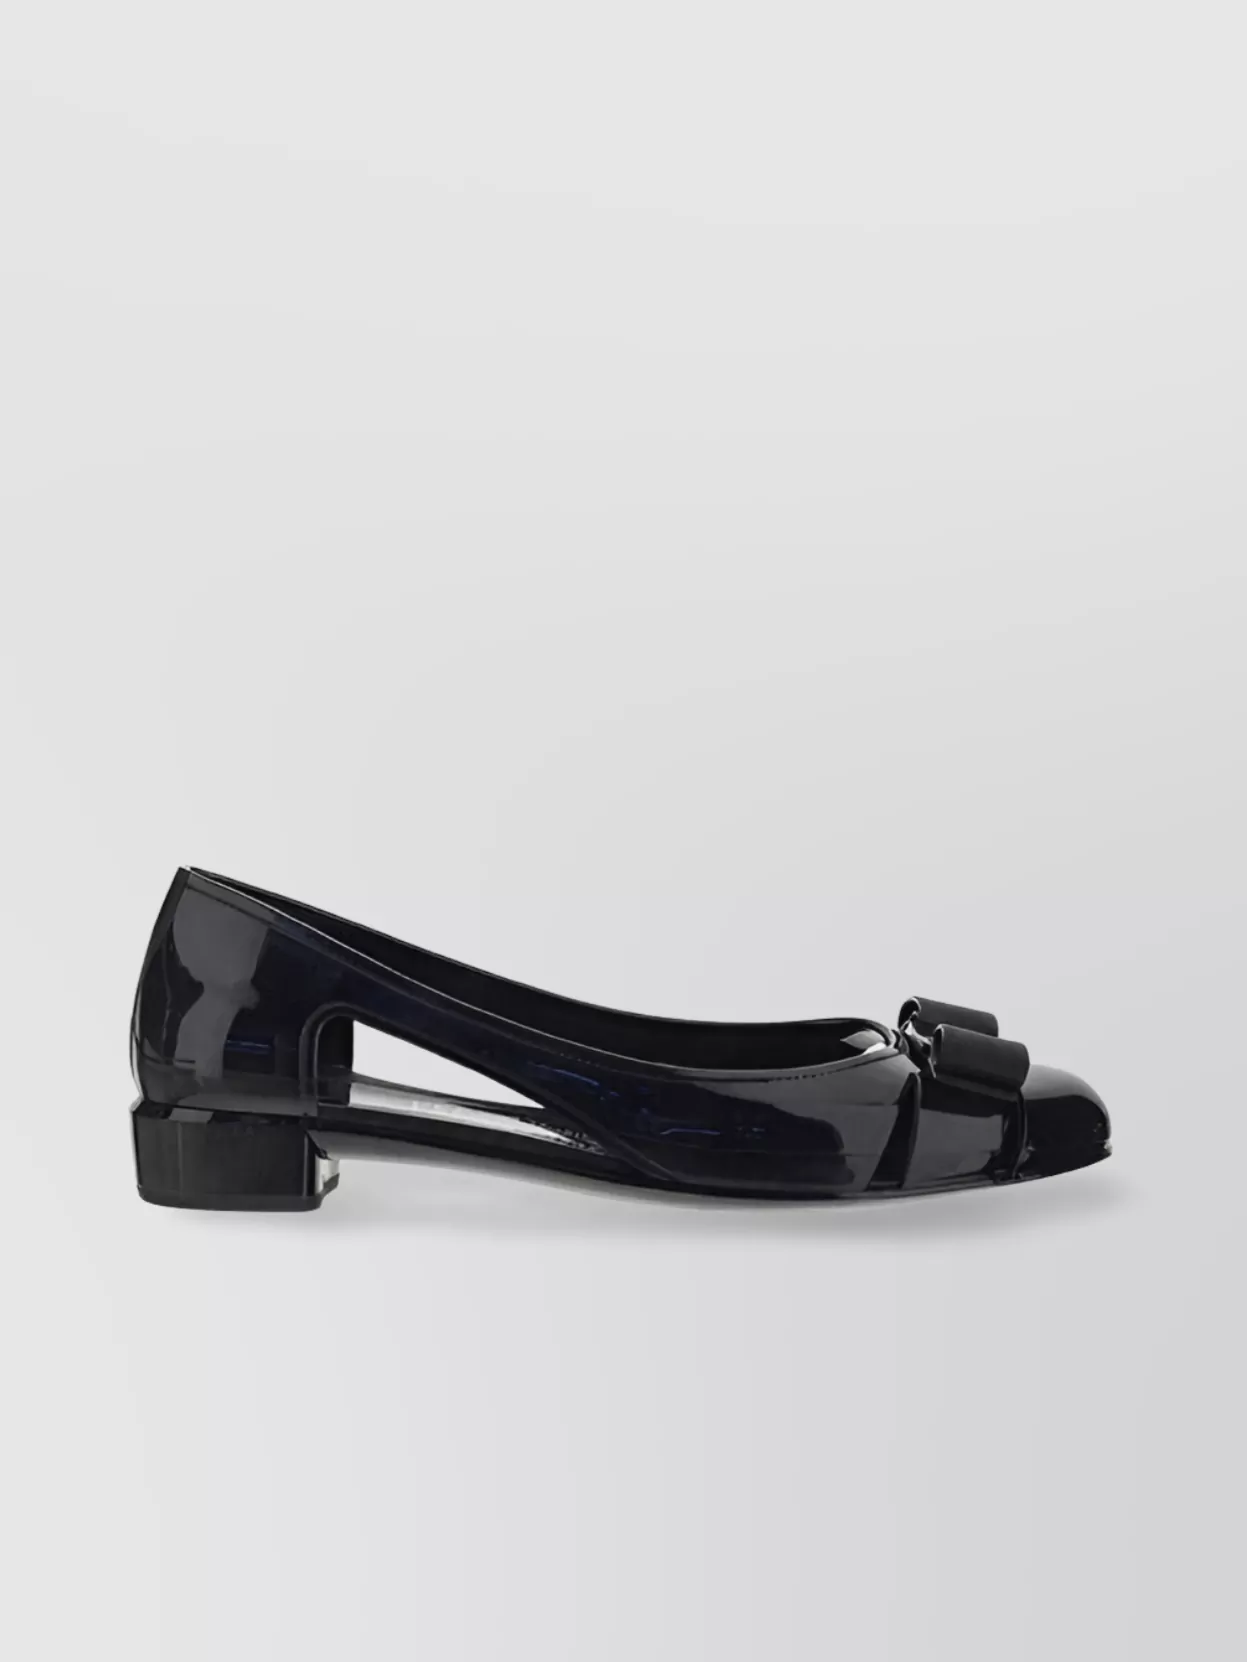 Shop Ferragamo Jelly Pumps Featuring Bow Detail And Cut-out